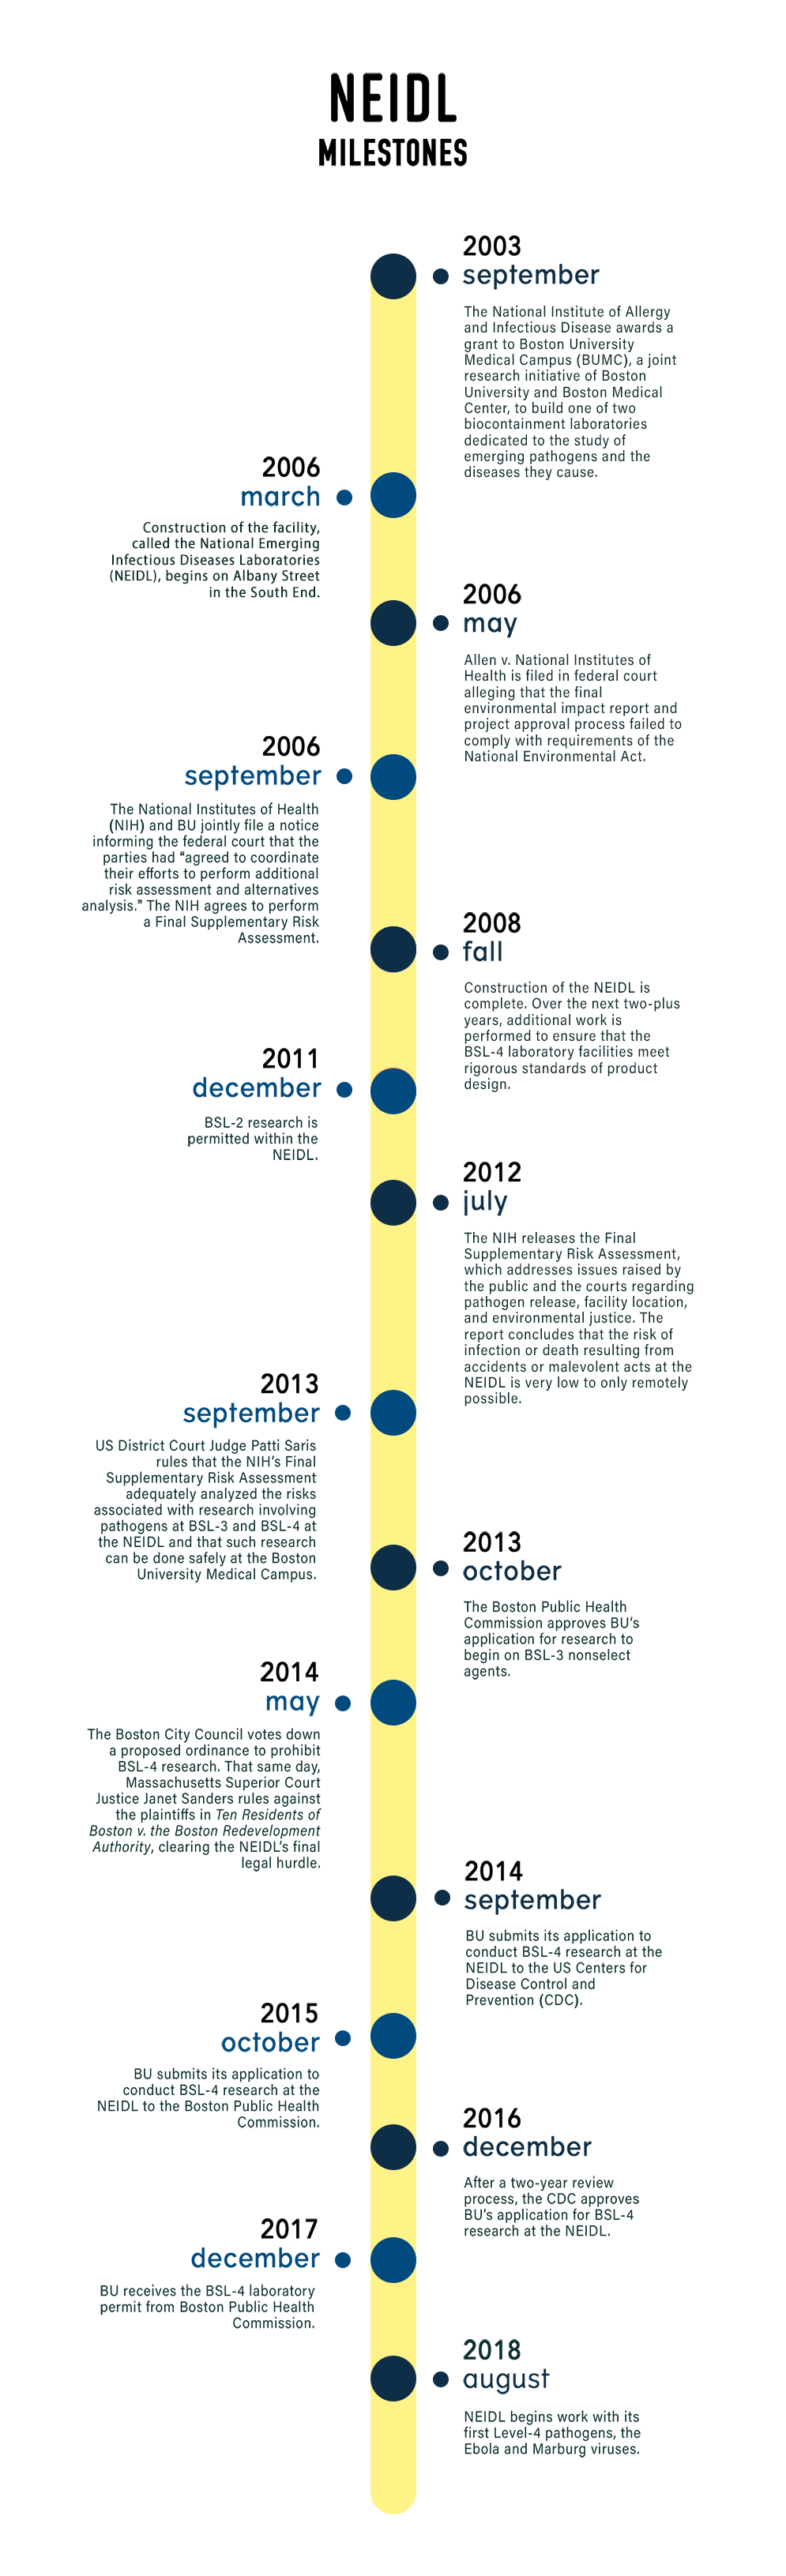 Infographic timeline of NEIDL milestone dates and events.